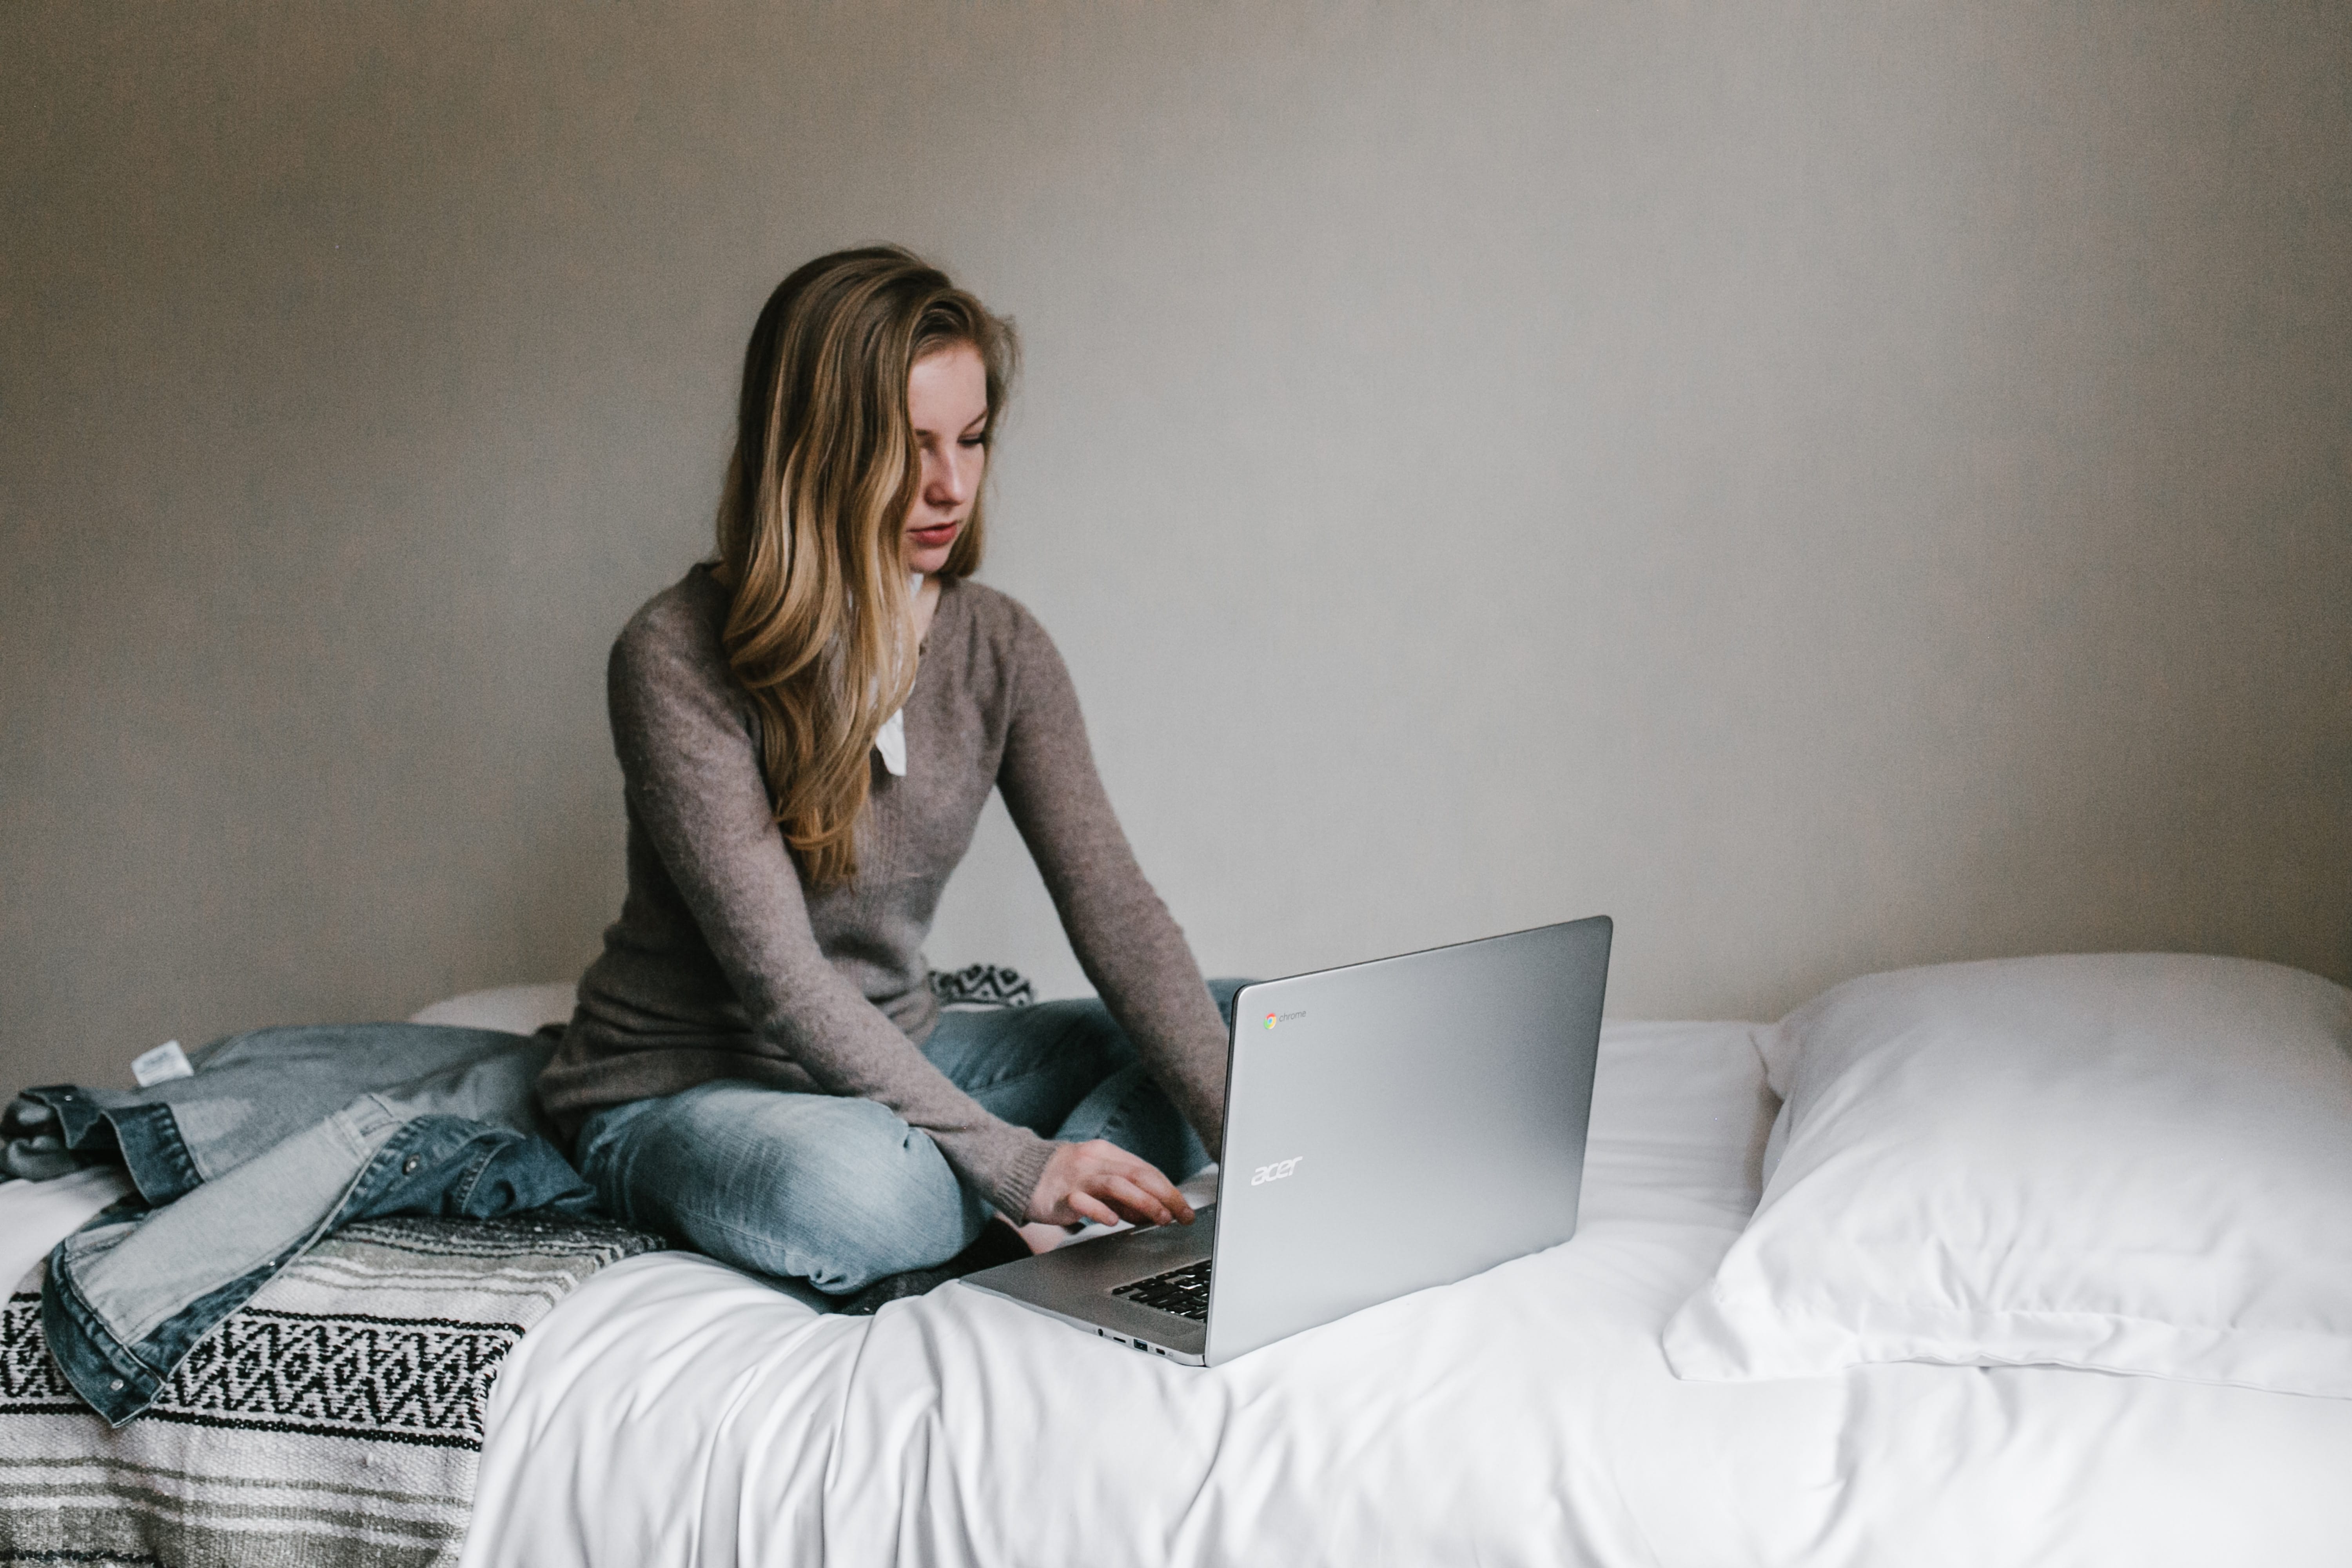 Woman sitting on bed working on laptop; image by Andrew Neel, via Unsplash.com.